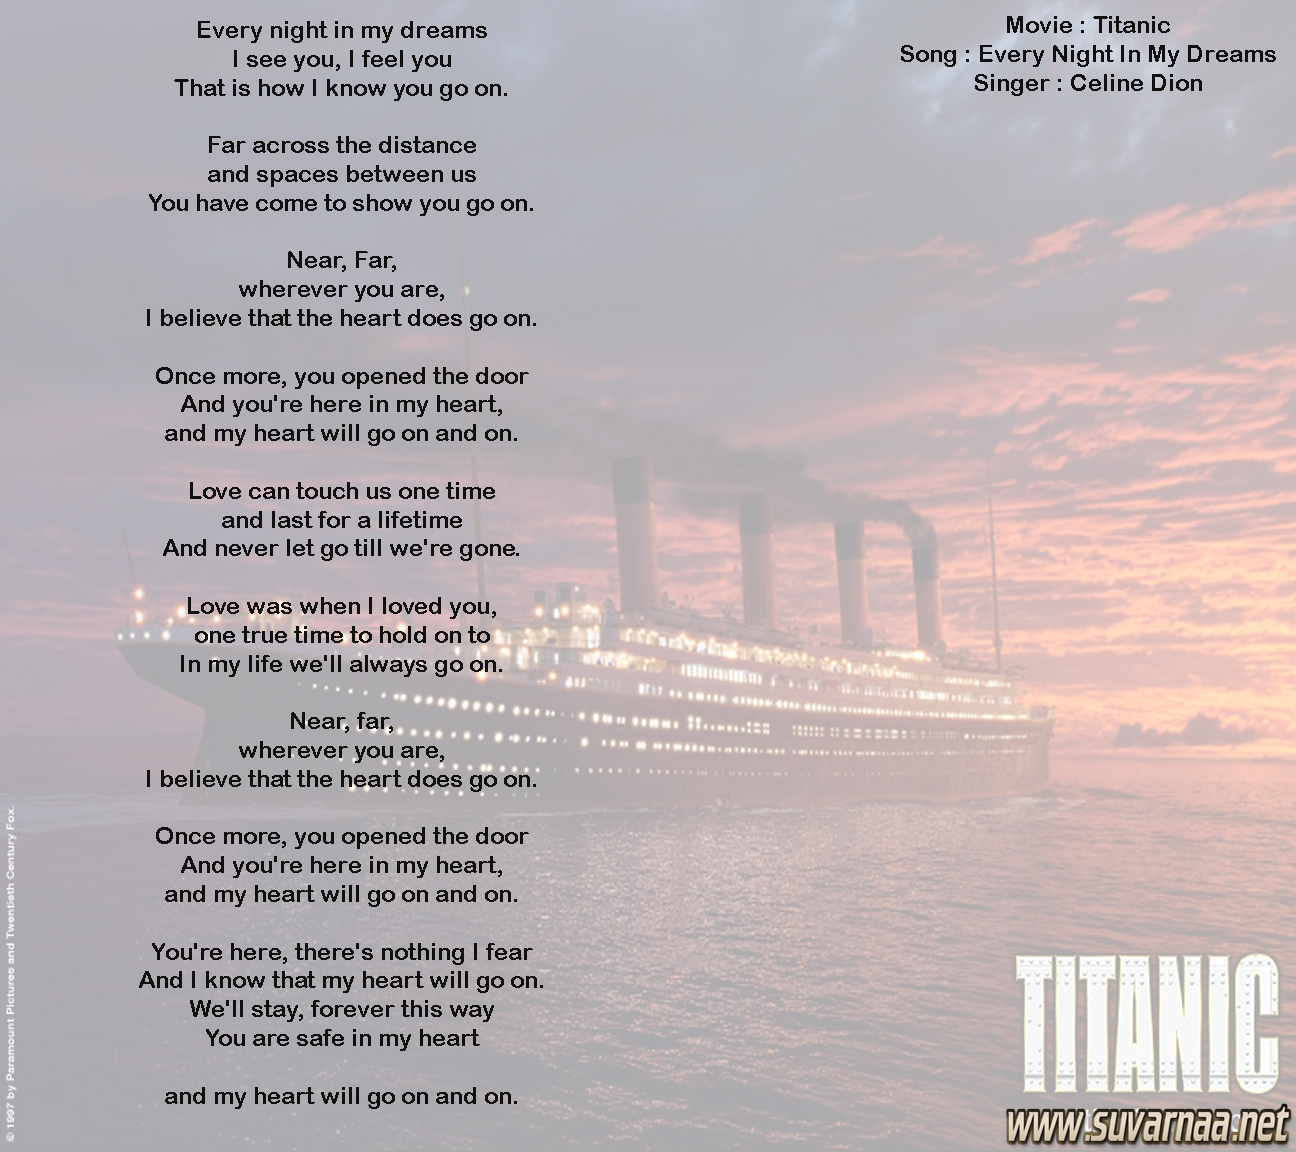 Every Night In My Dreams- Titanic Movie Song-:) - YouTube Movie songs.